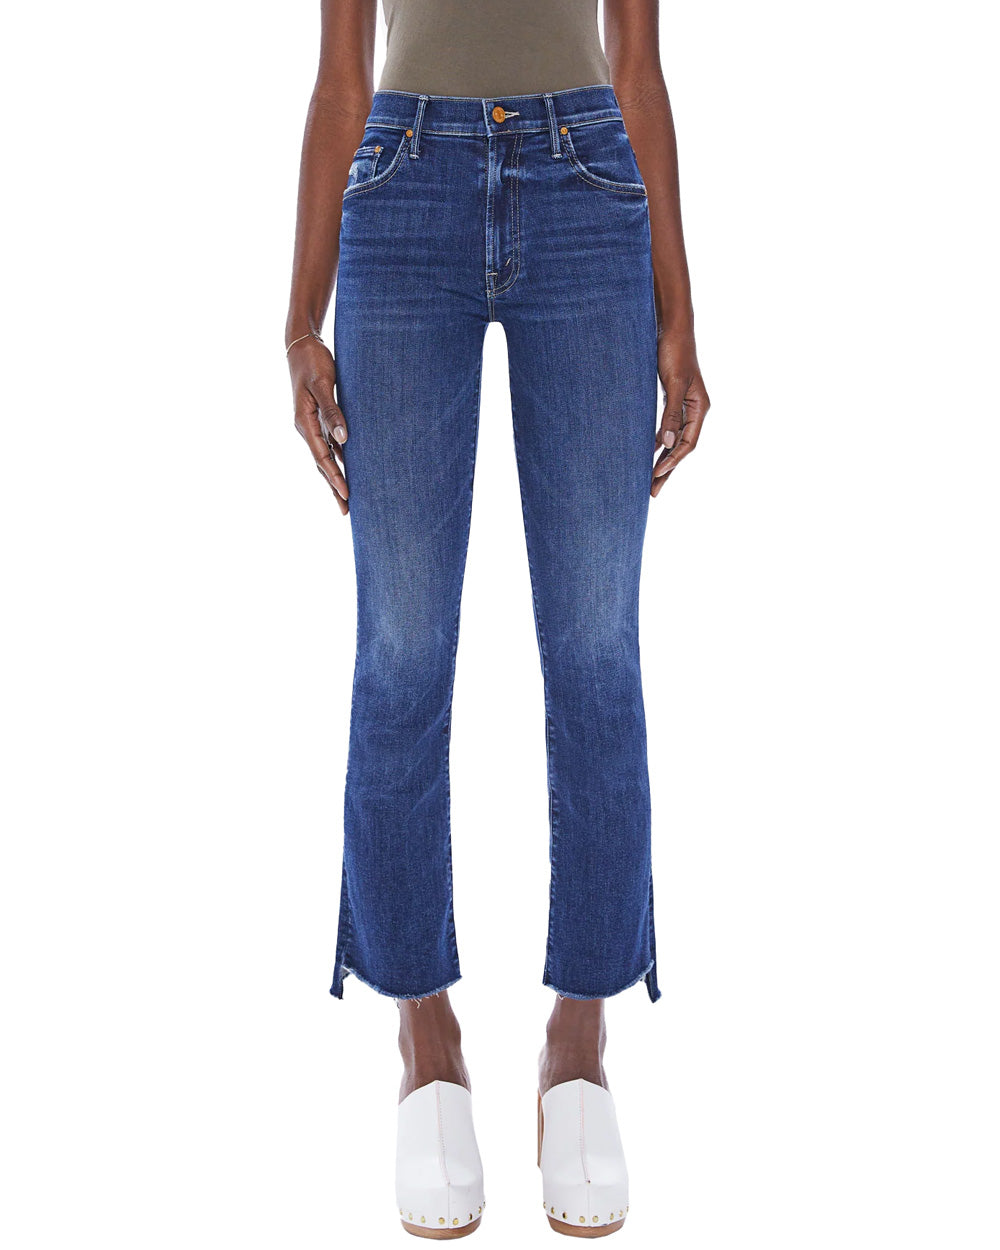 The Insider Crop Step Fray Jean in Teaming Up